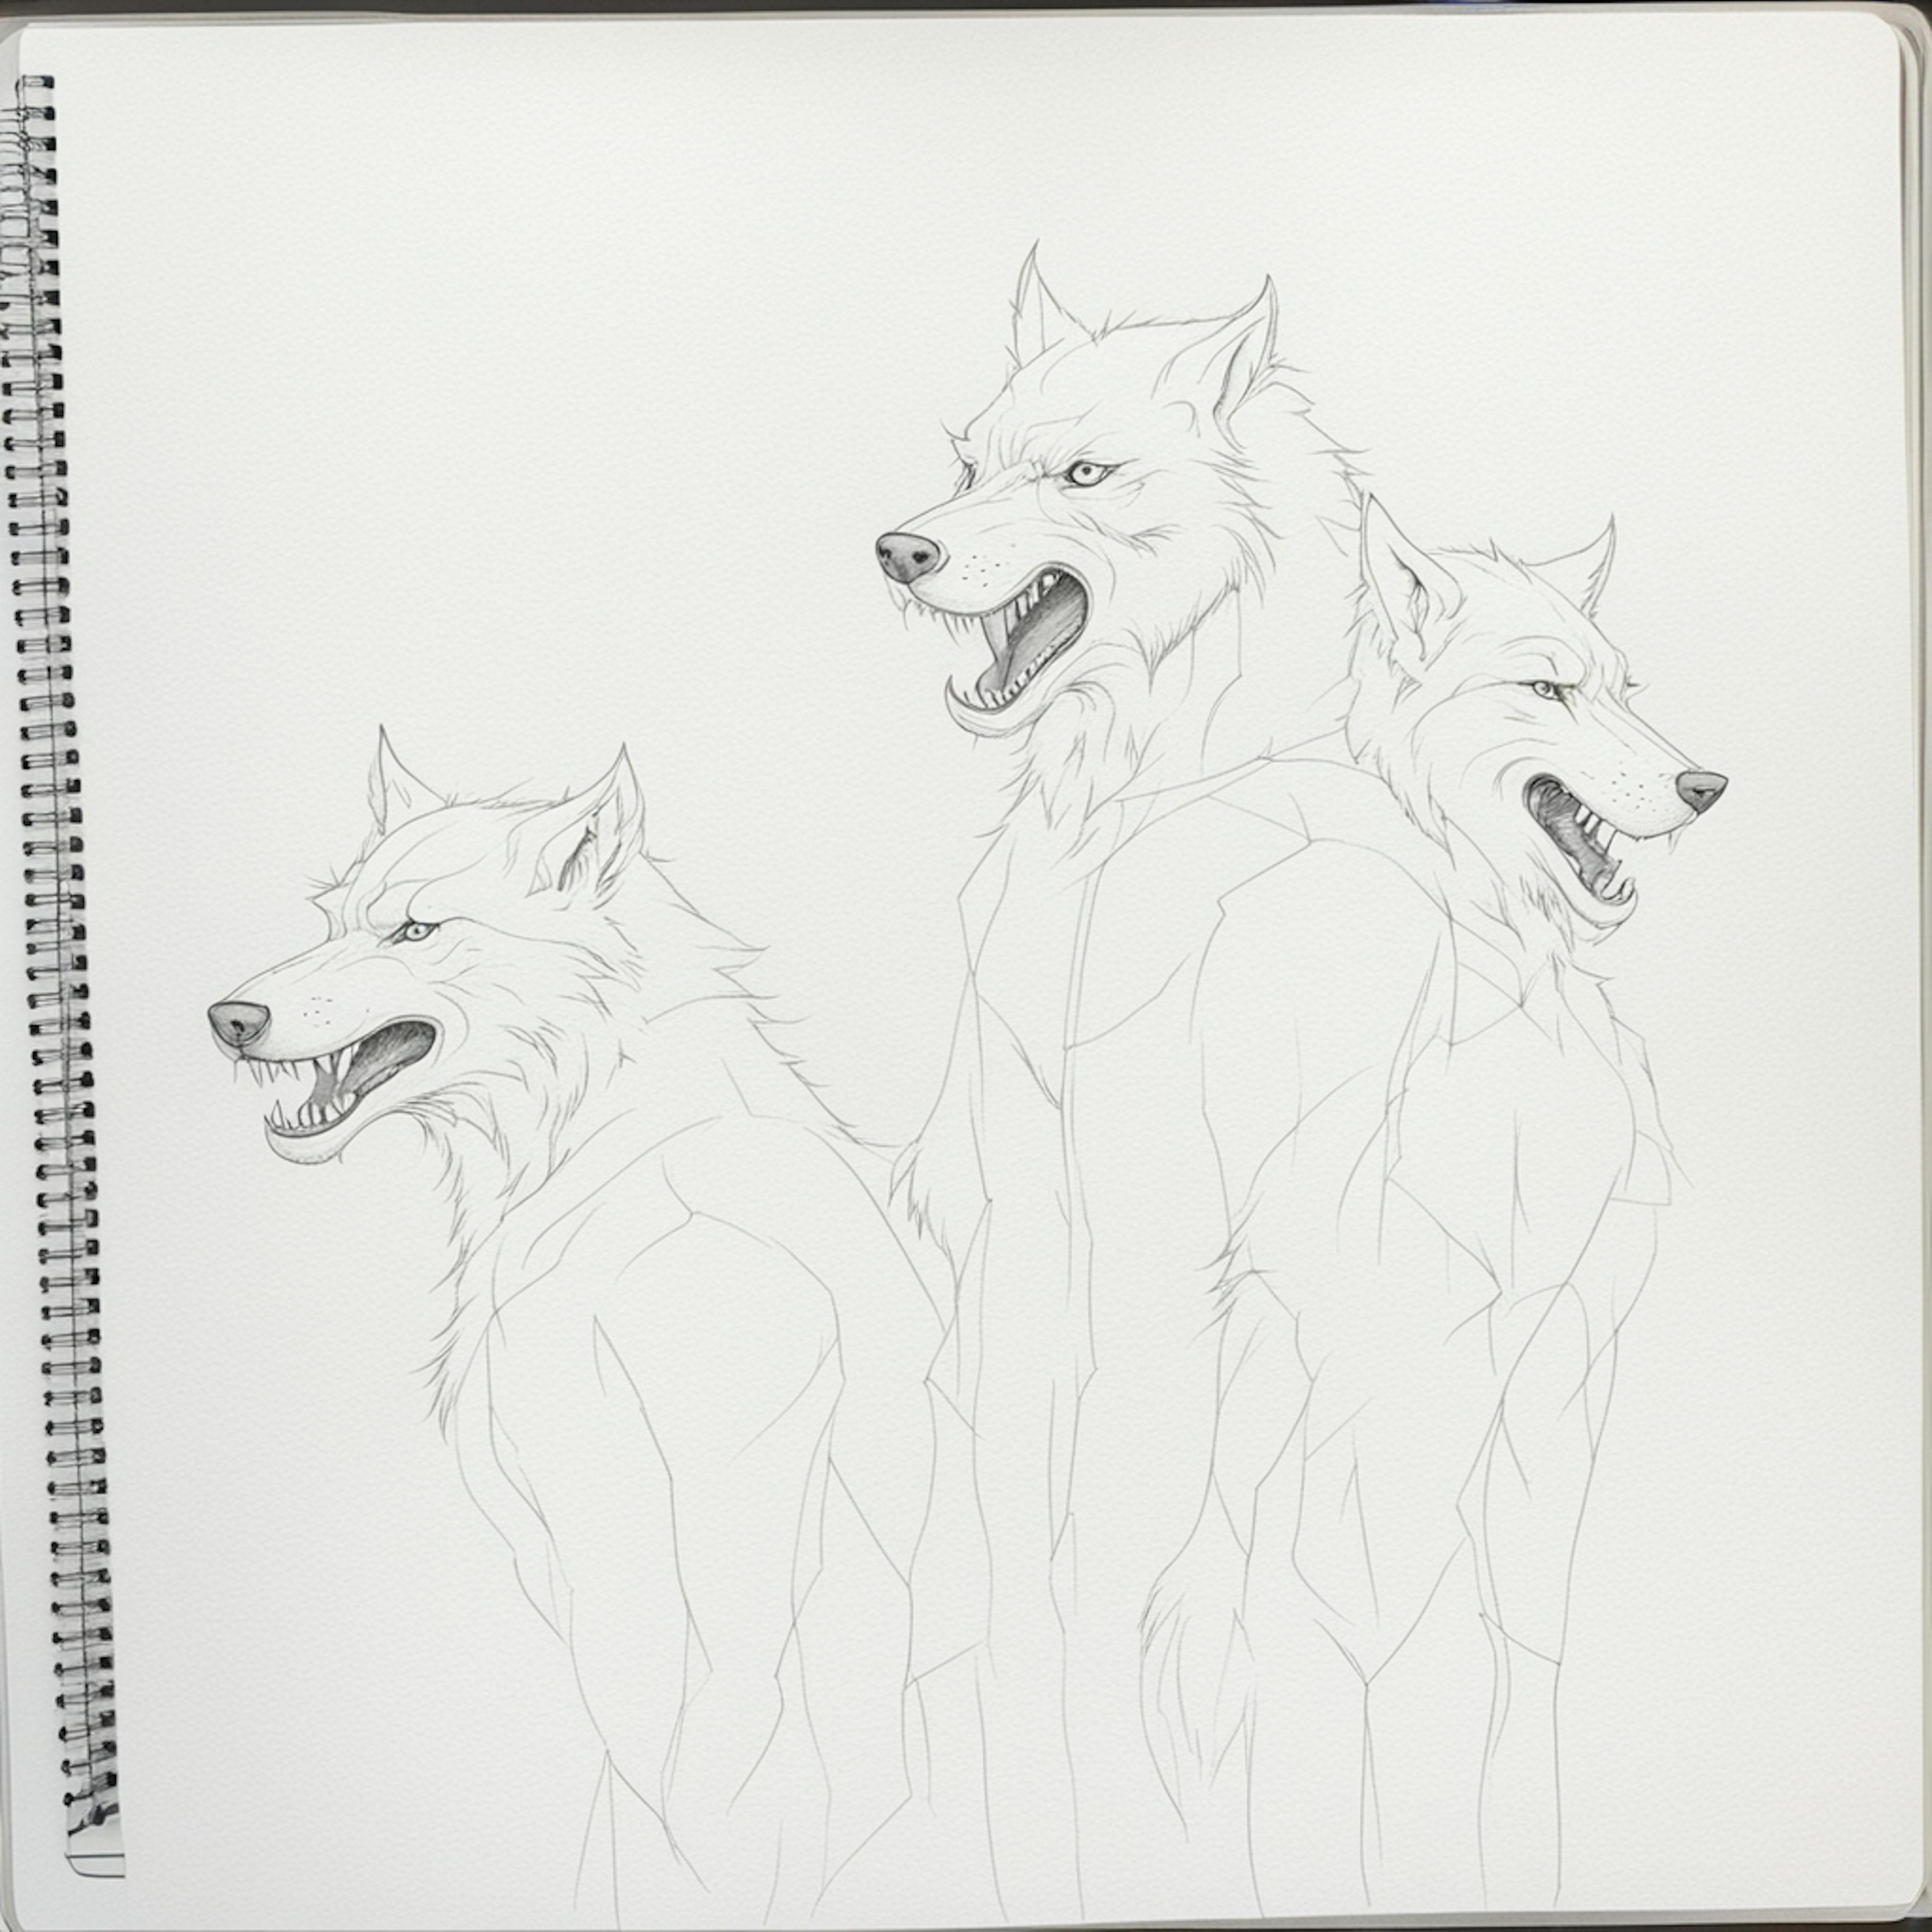 A detailed pencil drawing of three snarling werewolves, each showcasing sharp teeth and fierce expressions. The sketch is done on a spiral-bound notebook, highlighting the intricate fur and muscular build of the creatures. The background is kept simple to focus on the werewolves. This image is perfect for illustrating "pencil werewolf drawing."